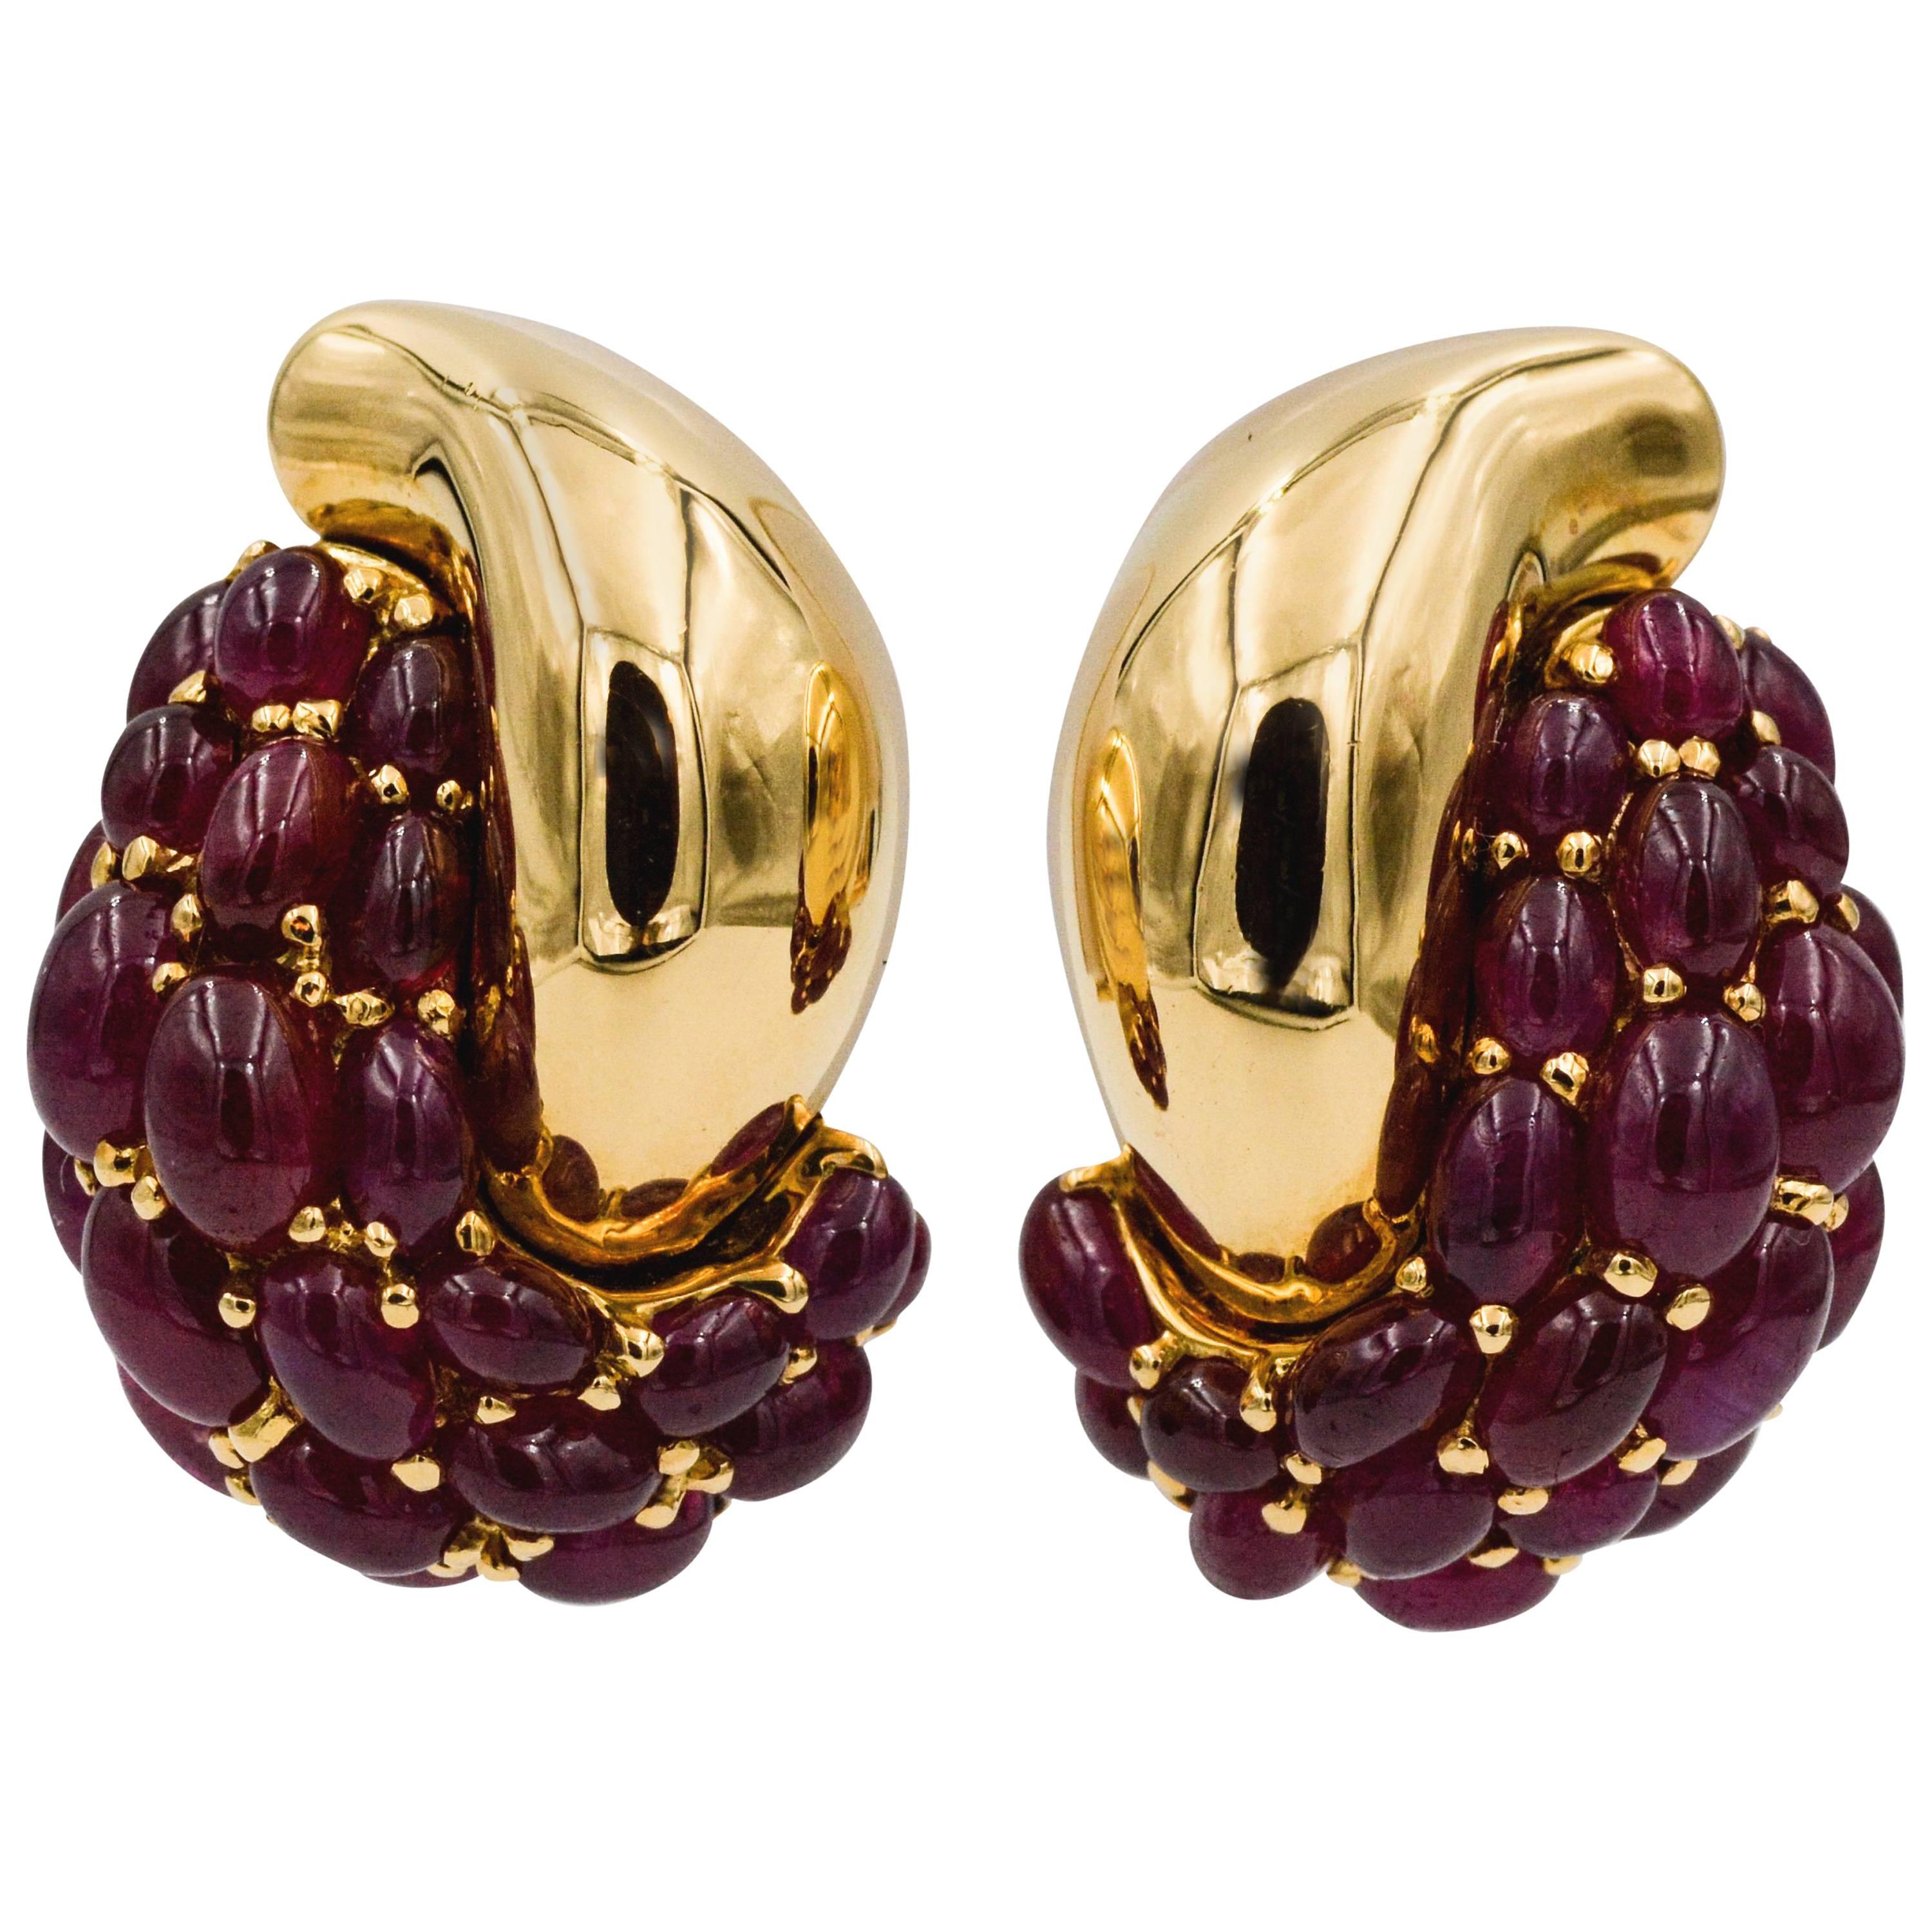 Seaman Schepps Yellow Gold and Ruby Earrings